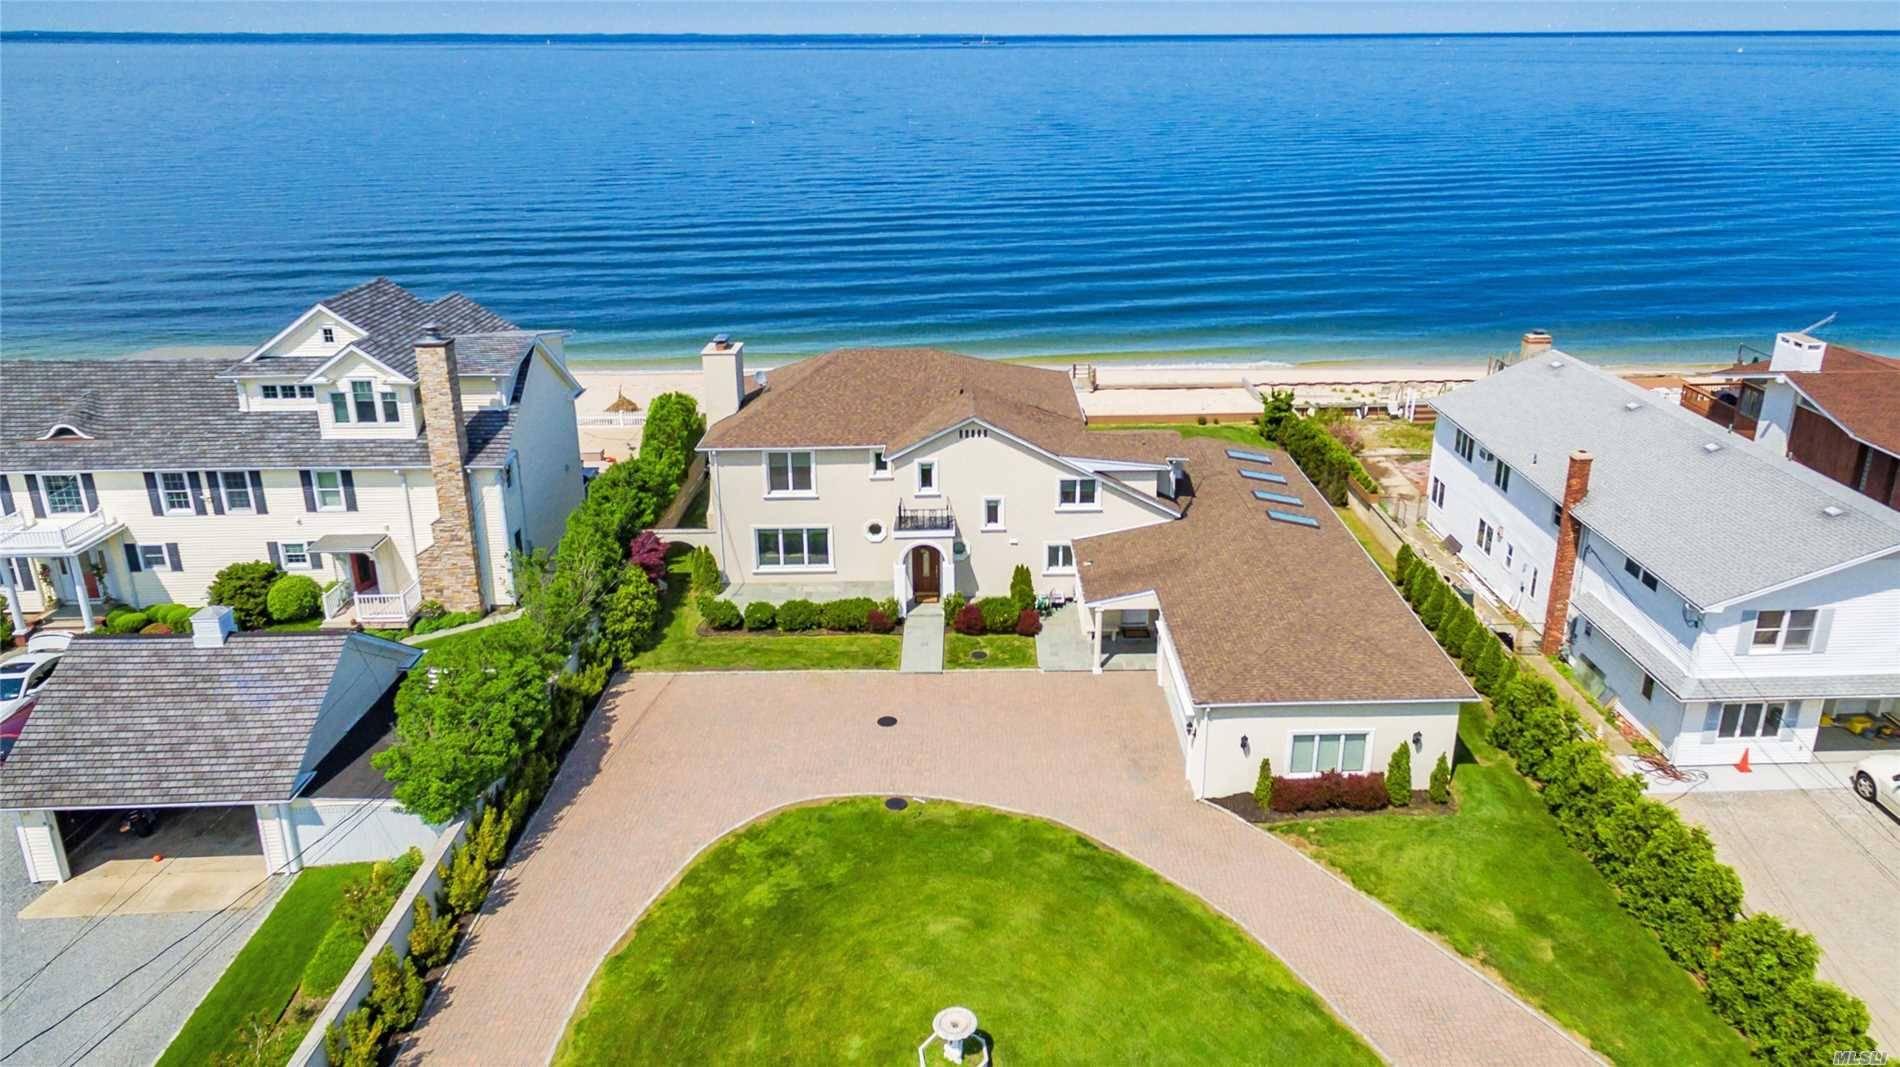 Spectacular 4300 Sq Ft Waterfront Home w 100 feet of Beachfront overlooking LI Sound Connecticut.